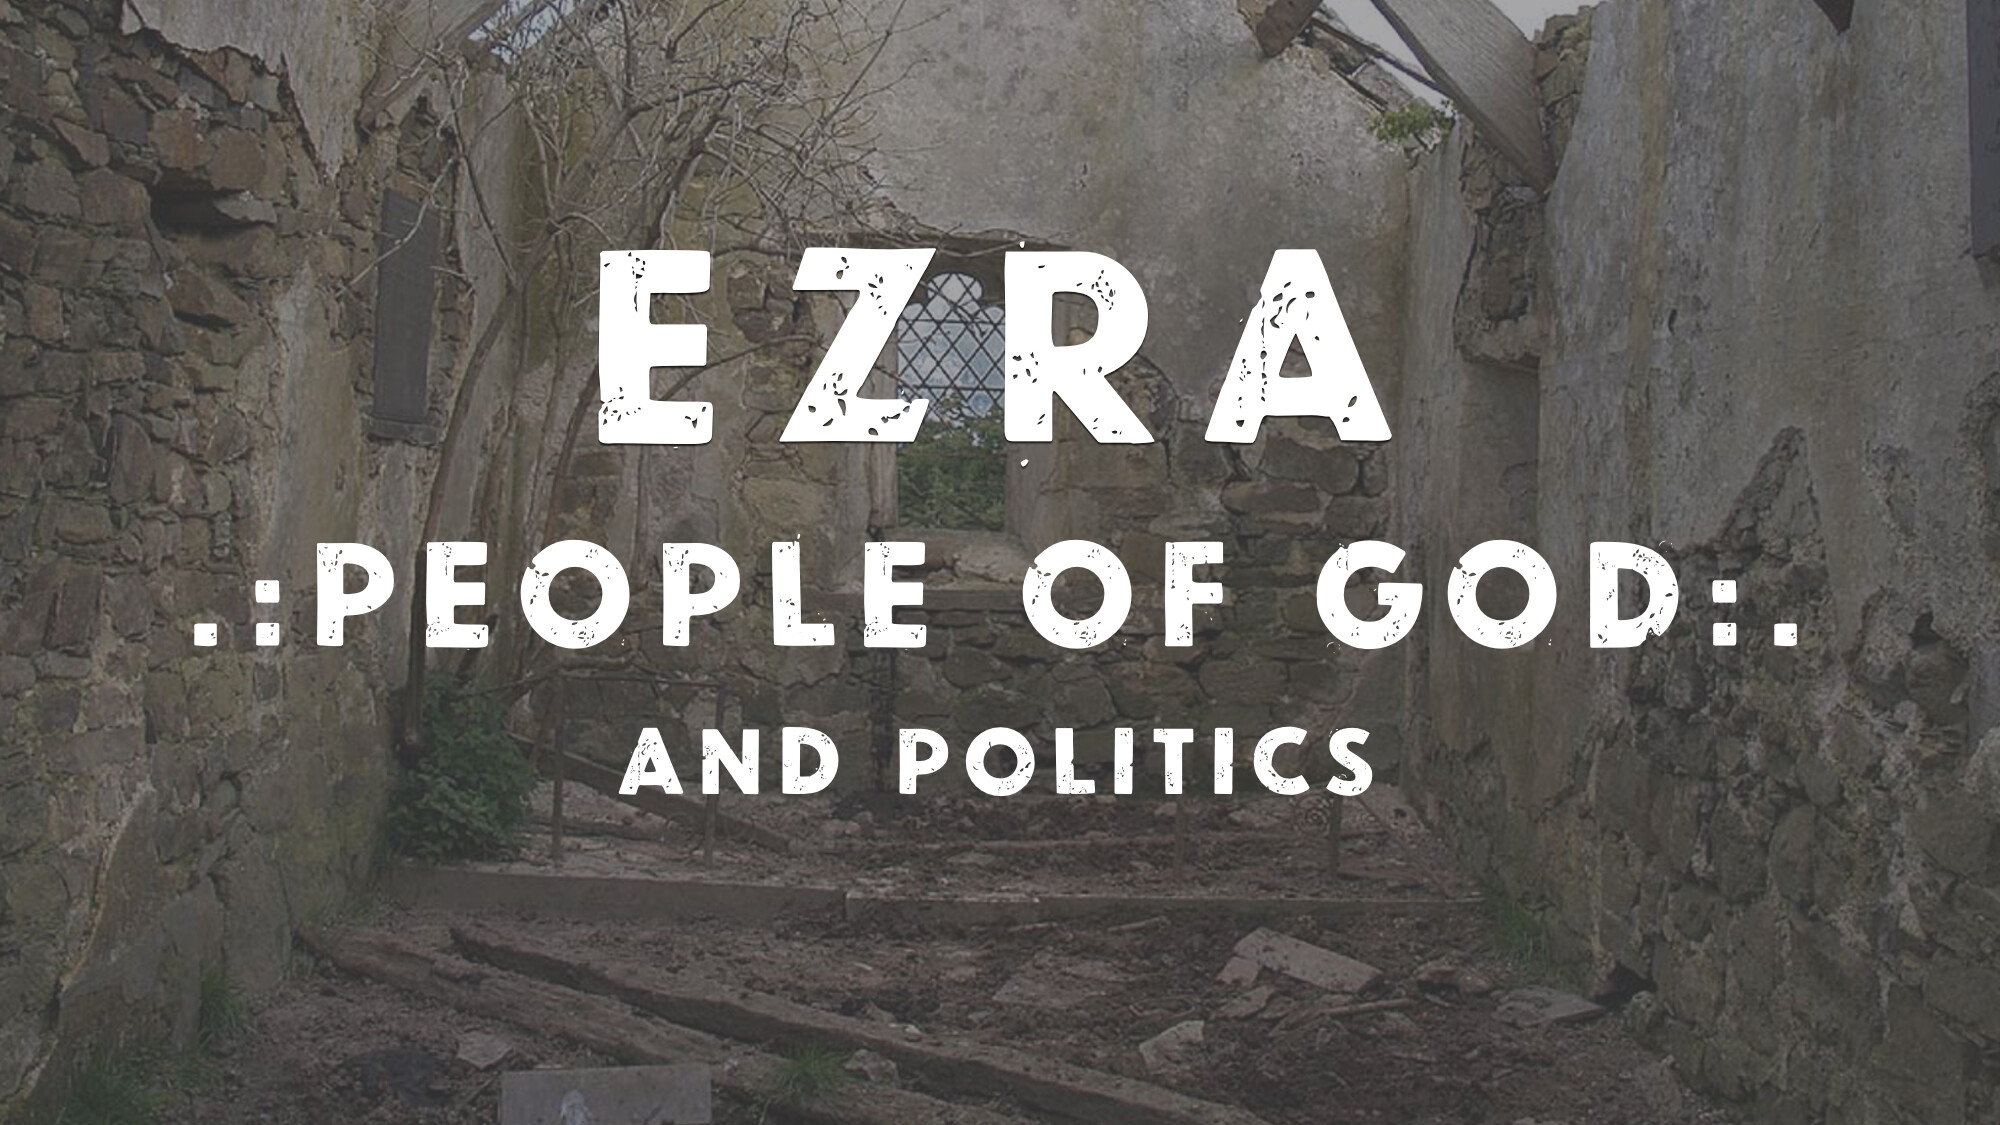 The People of God and Politics